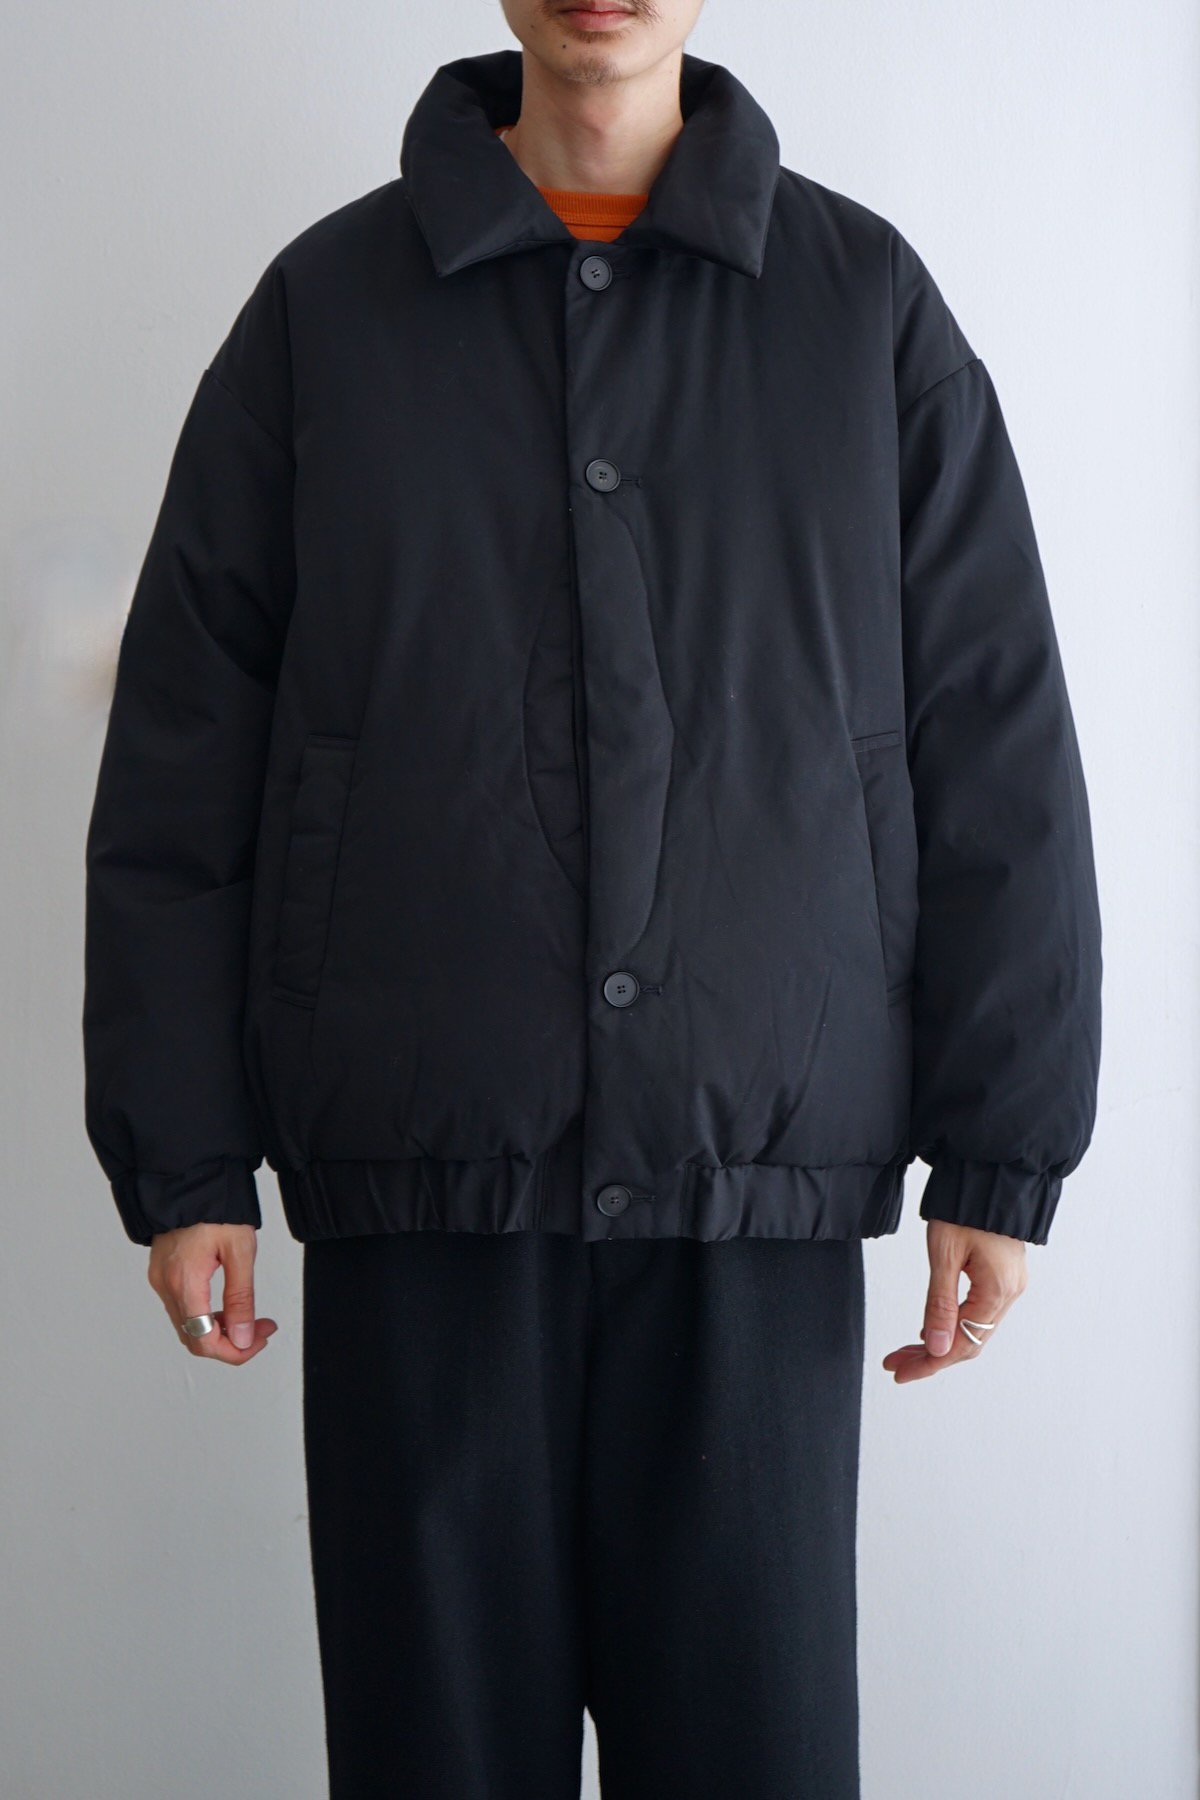 Outer wear - Nid ONLINE STORE